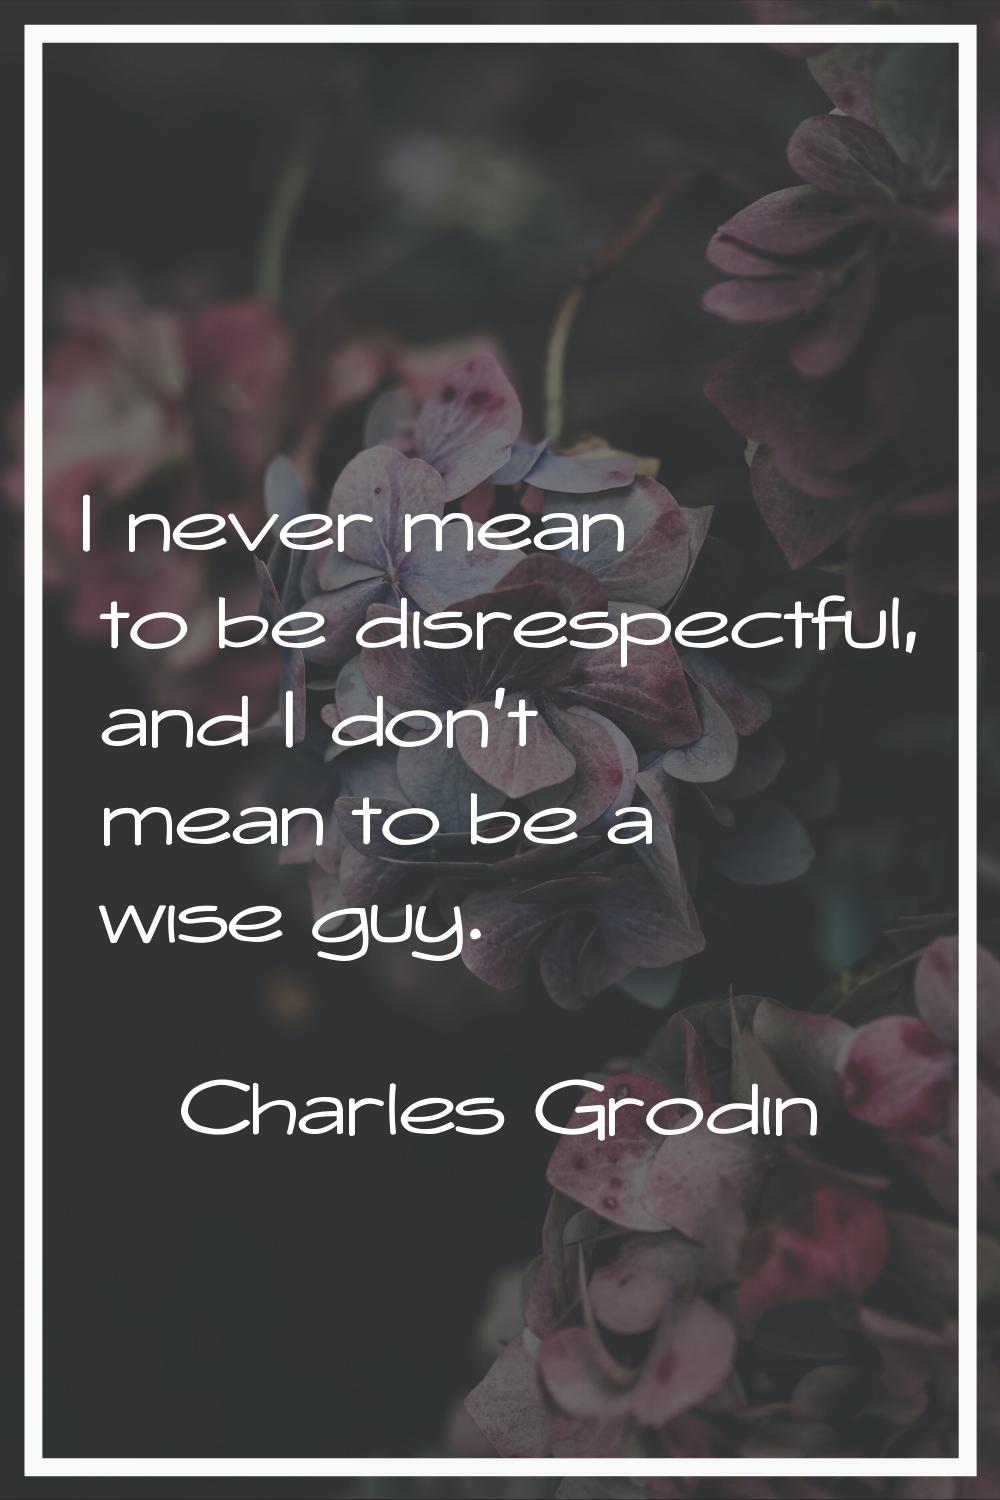 I never mean to be disrespectful, and I don't mean to be a wise guy.